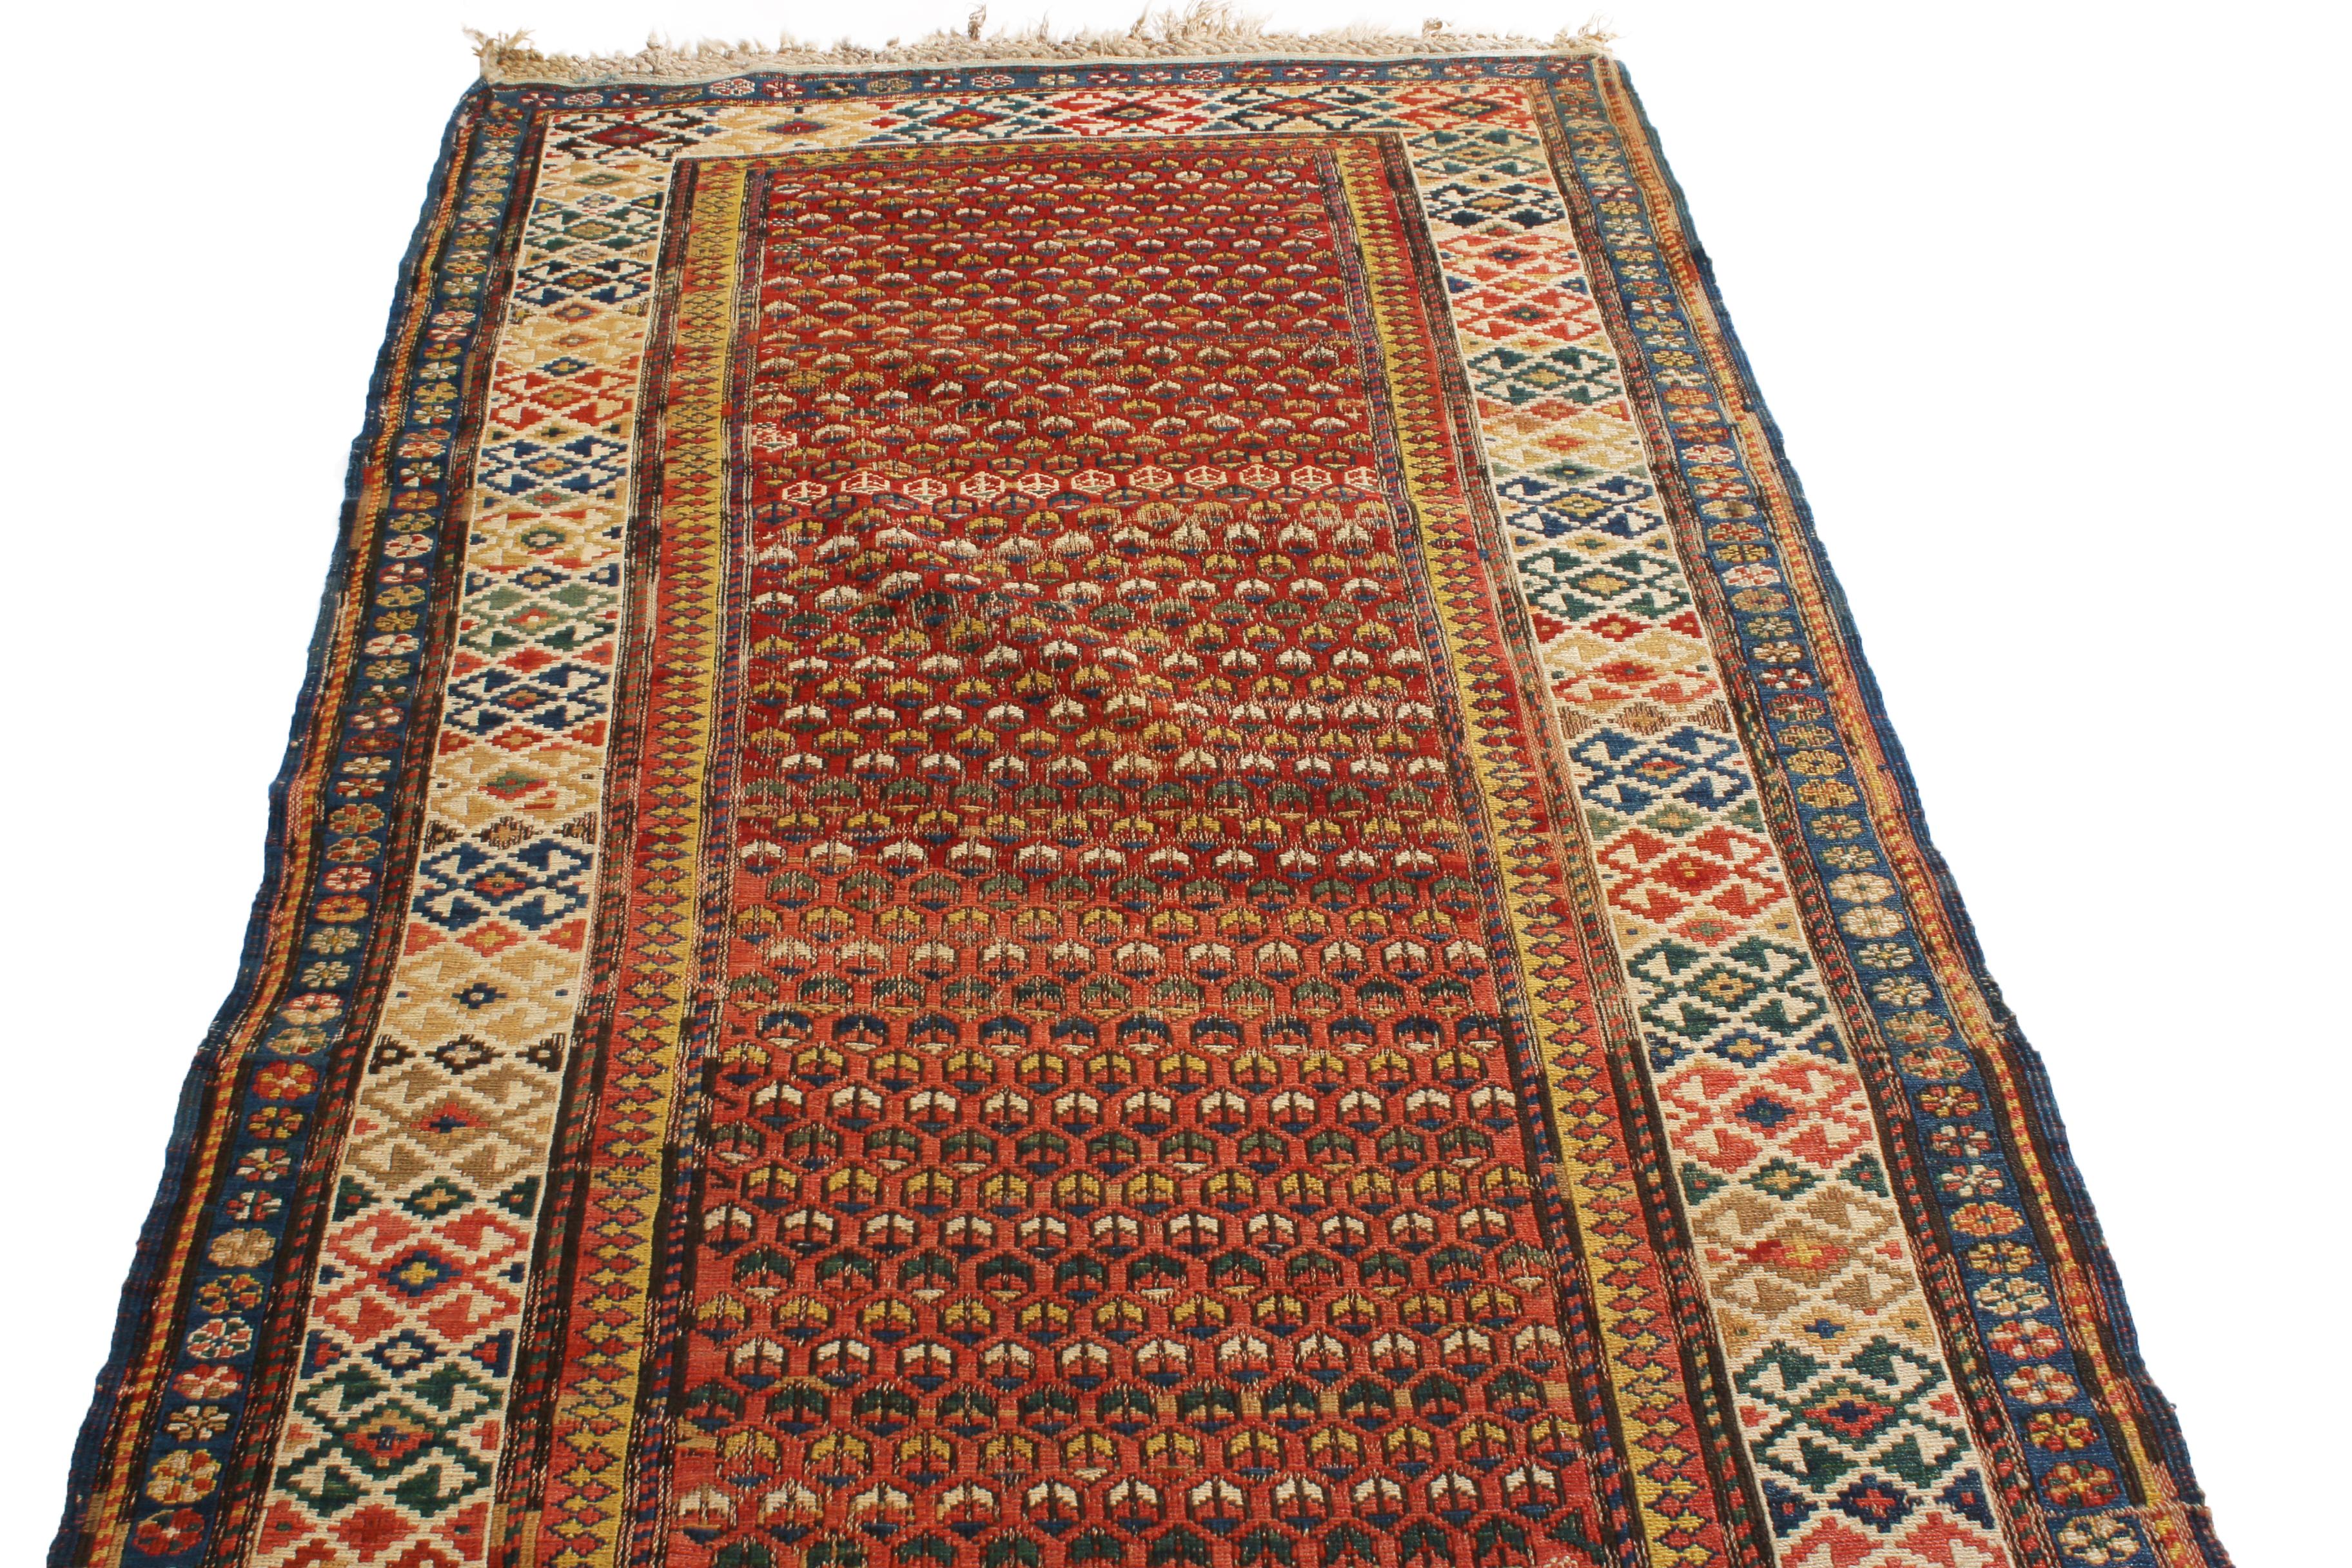 Hand knotted in high quality wool originating from Russia between 1890-1900, this bold antique Soumak rug hosts a distinguished array of traditionally rich and uncommonly spirited tribal colourways, balancing a repeated series of rustic burgundy and